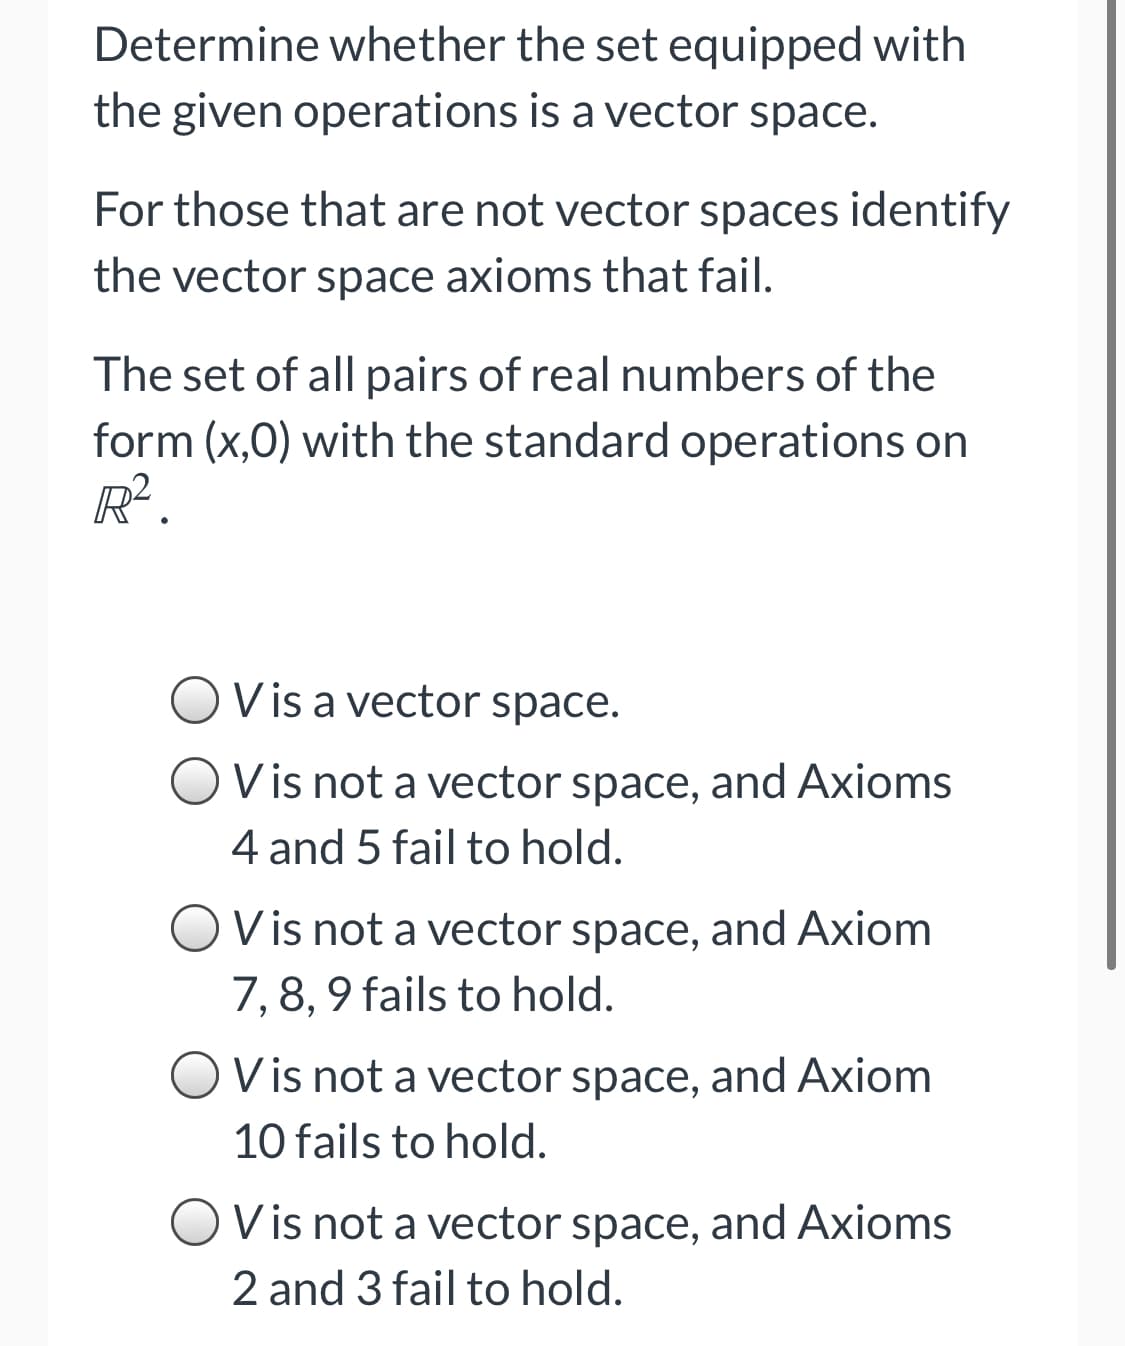 Determine whether the set equipped with
the given operations is a vector space.
For those that are not vector spaces identify
the vector space axioms that fail.
The set of all pairs of real numbers of the
form (x,0) with the standard operations on
R.
V is a vector space.
V is not a vector space, and Axioms
4 and 5 fail to hold.
V is not a vector space, and Axiom
7, 8, 9 fails to hold.
Vis not a vector space, and Axiom
10 fails to hold.
OVis not a vector space, and Axioms
2 and 3 fail to hold.
